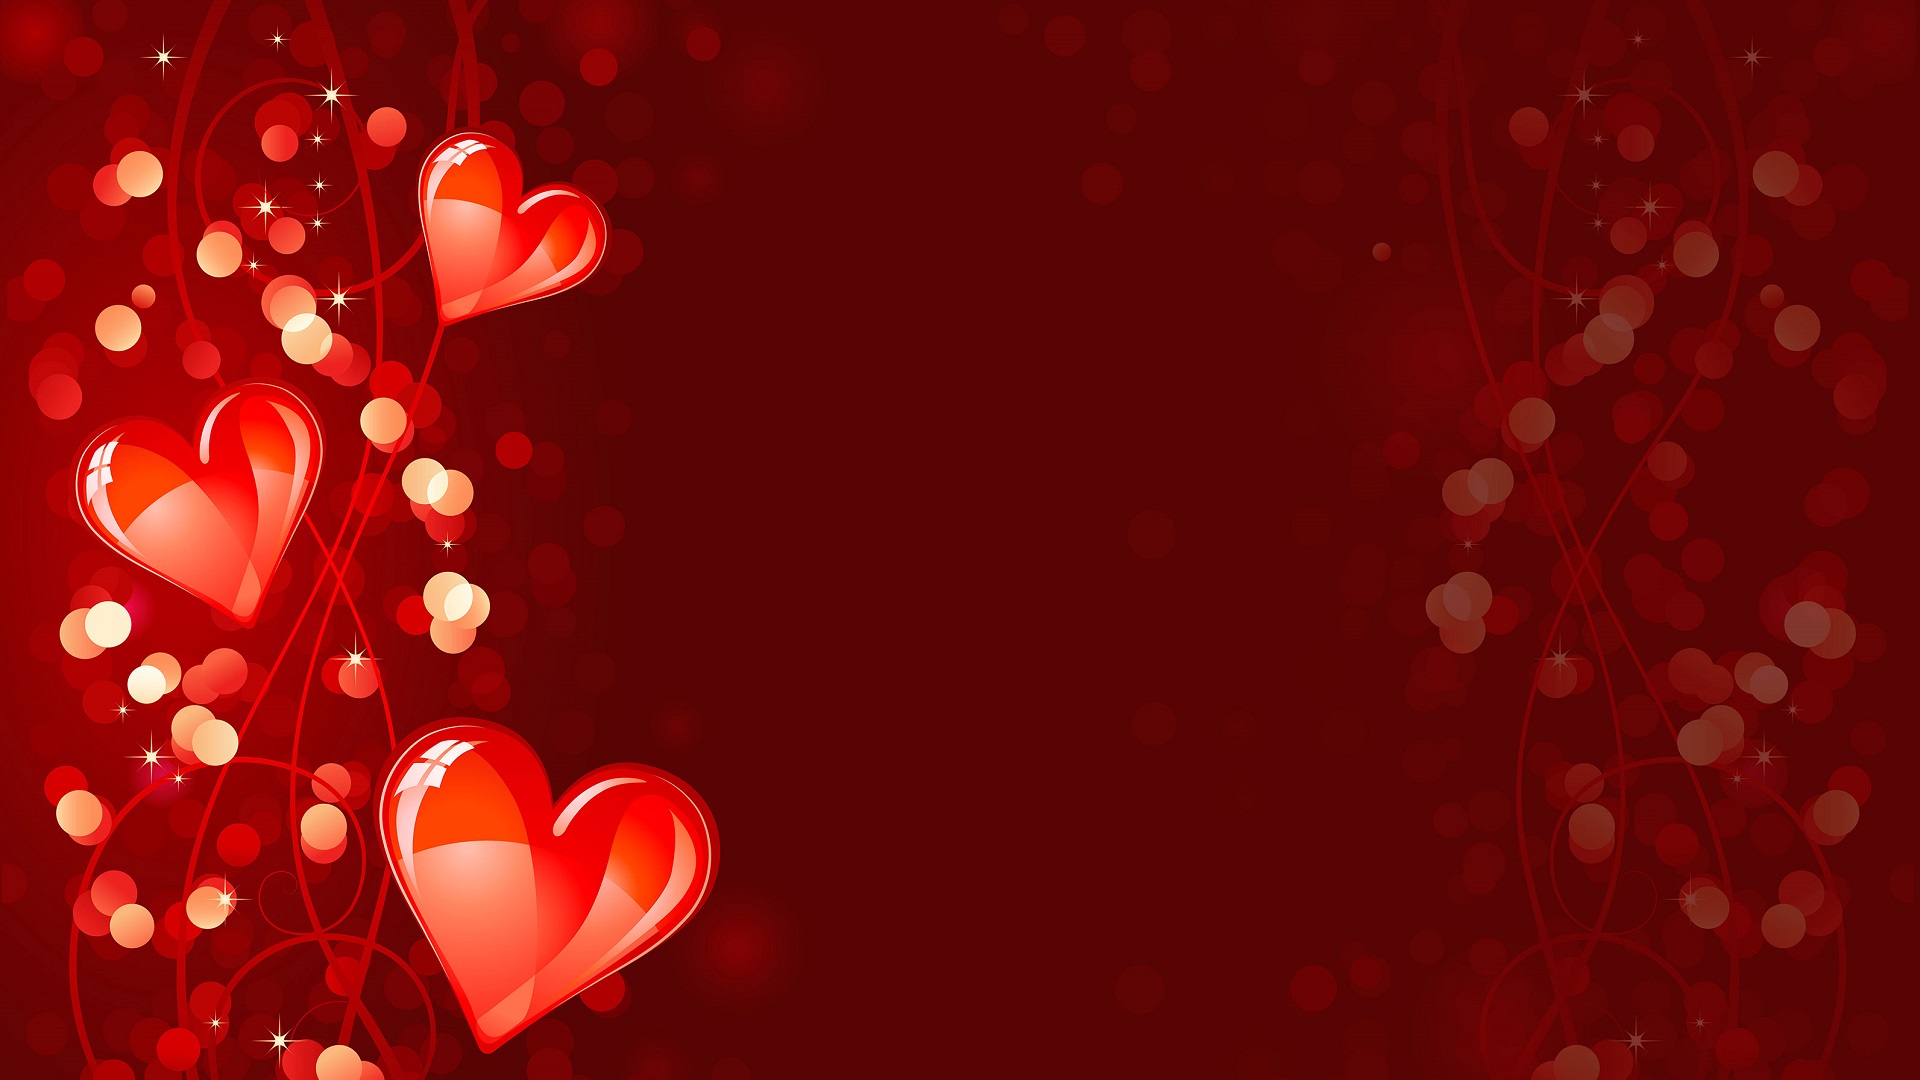 Love Images, Backgrounds & HD Wallpapers free download